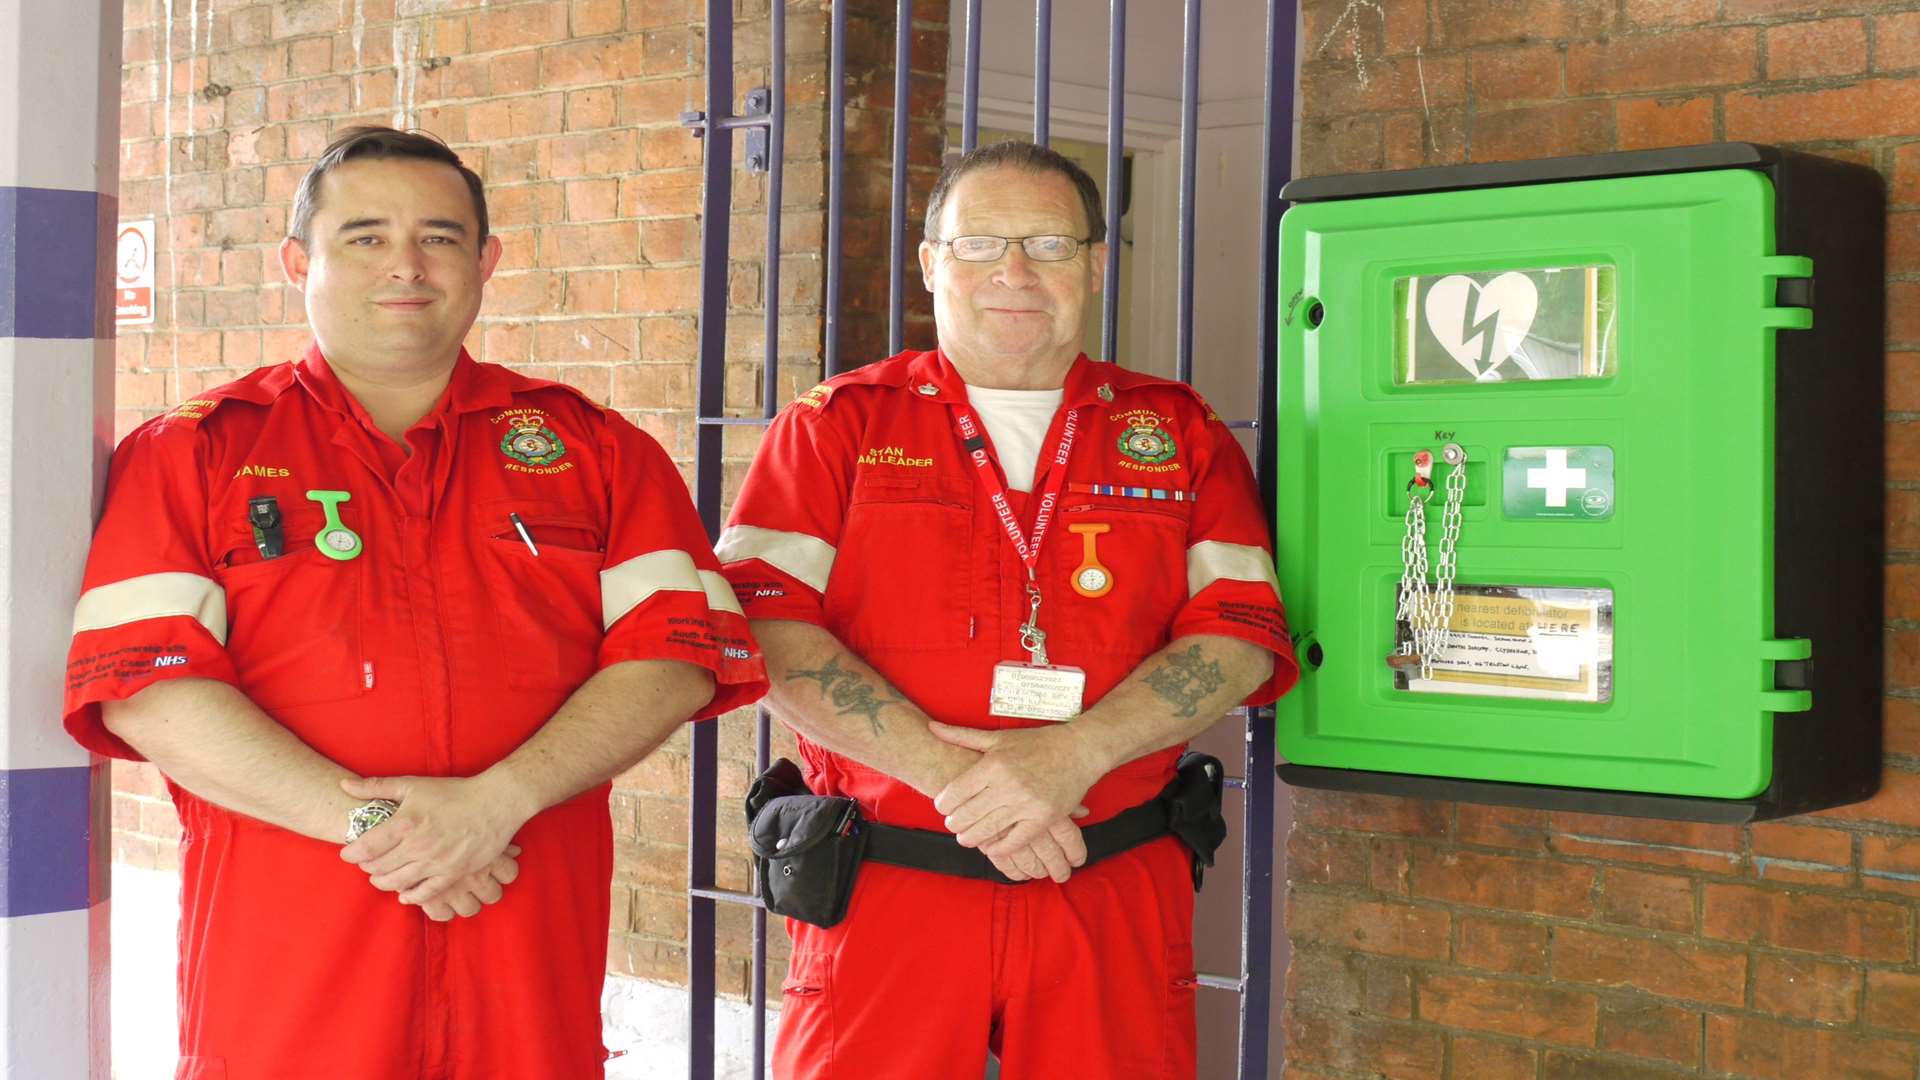 The Community First Responders are volunteer members of the community who are trained and dispatched by the Ambulance Service